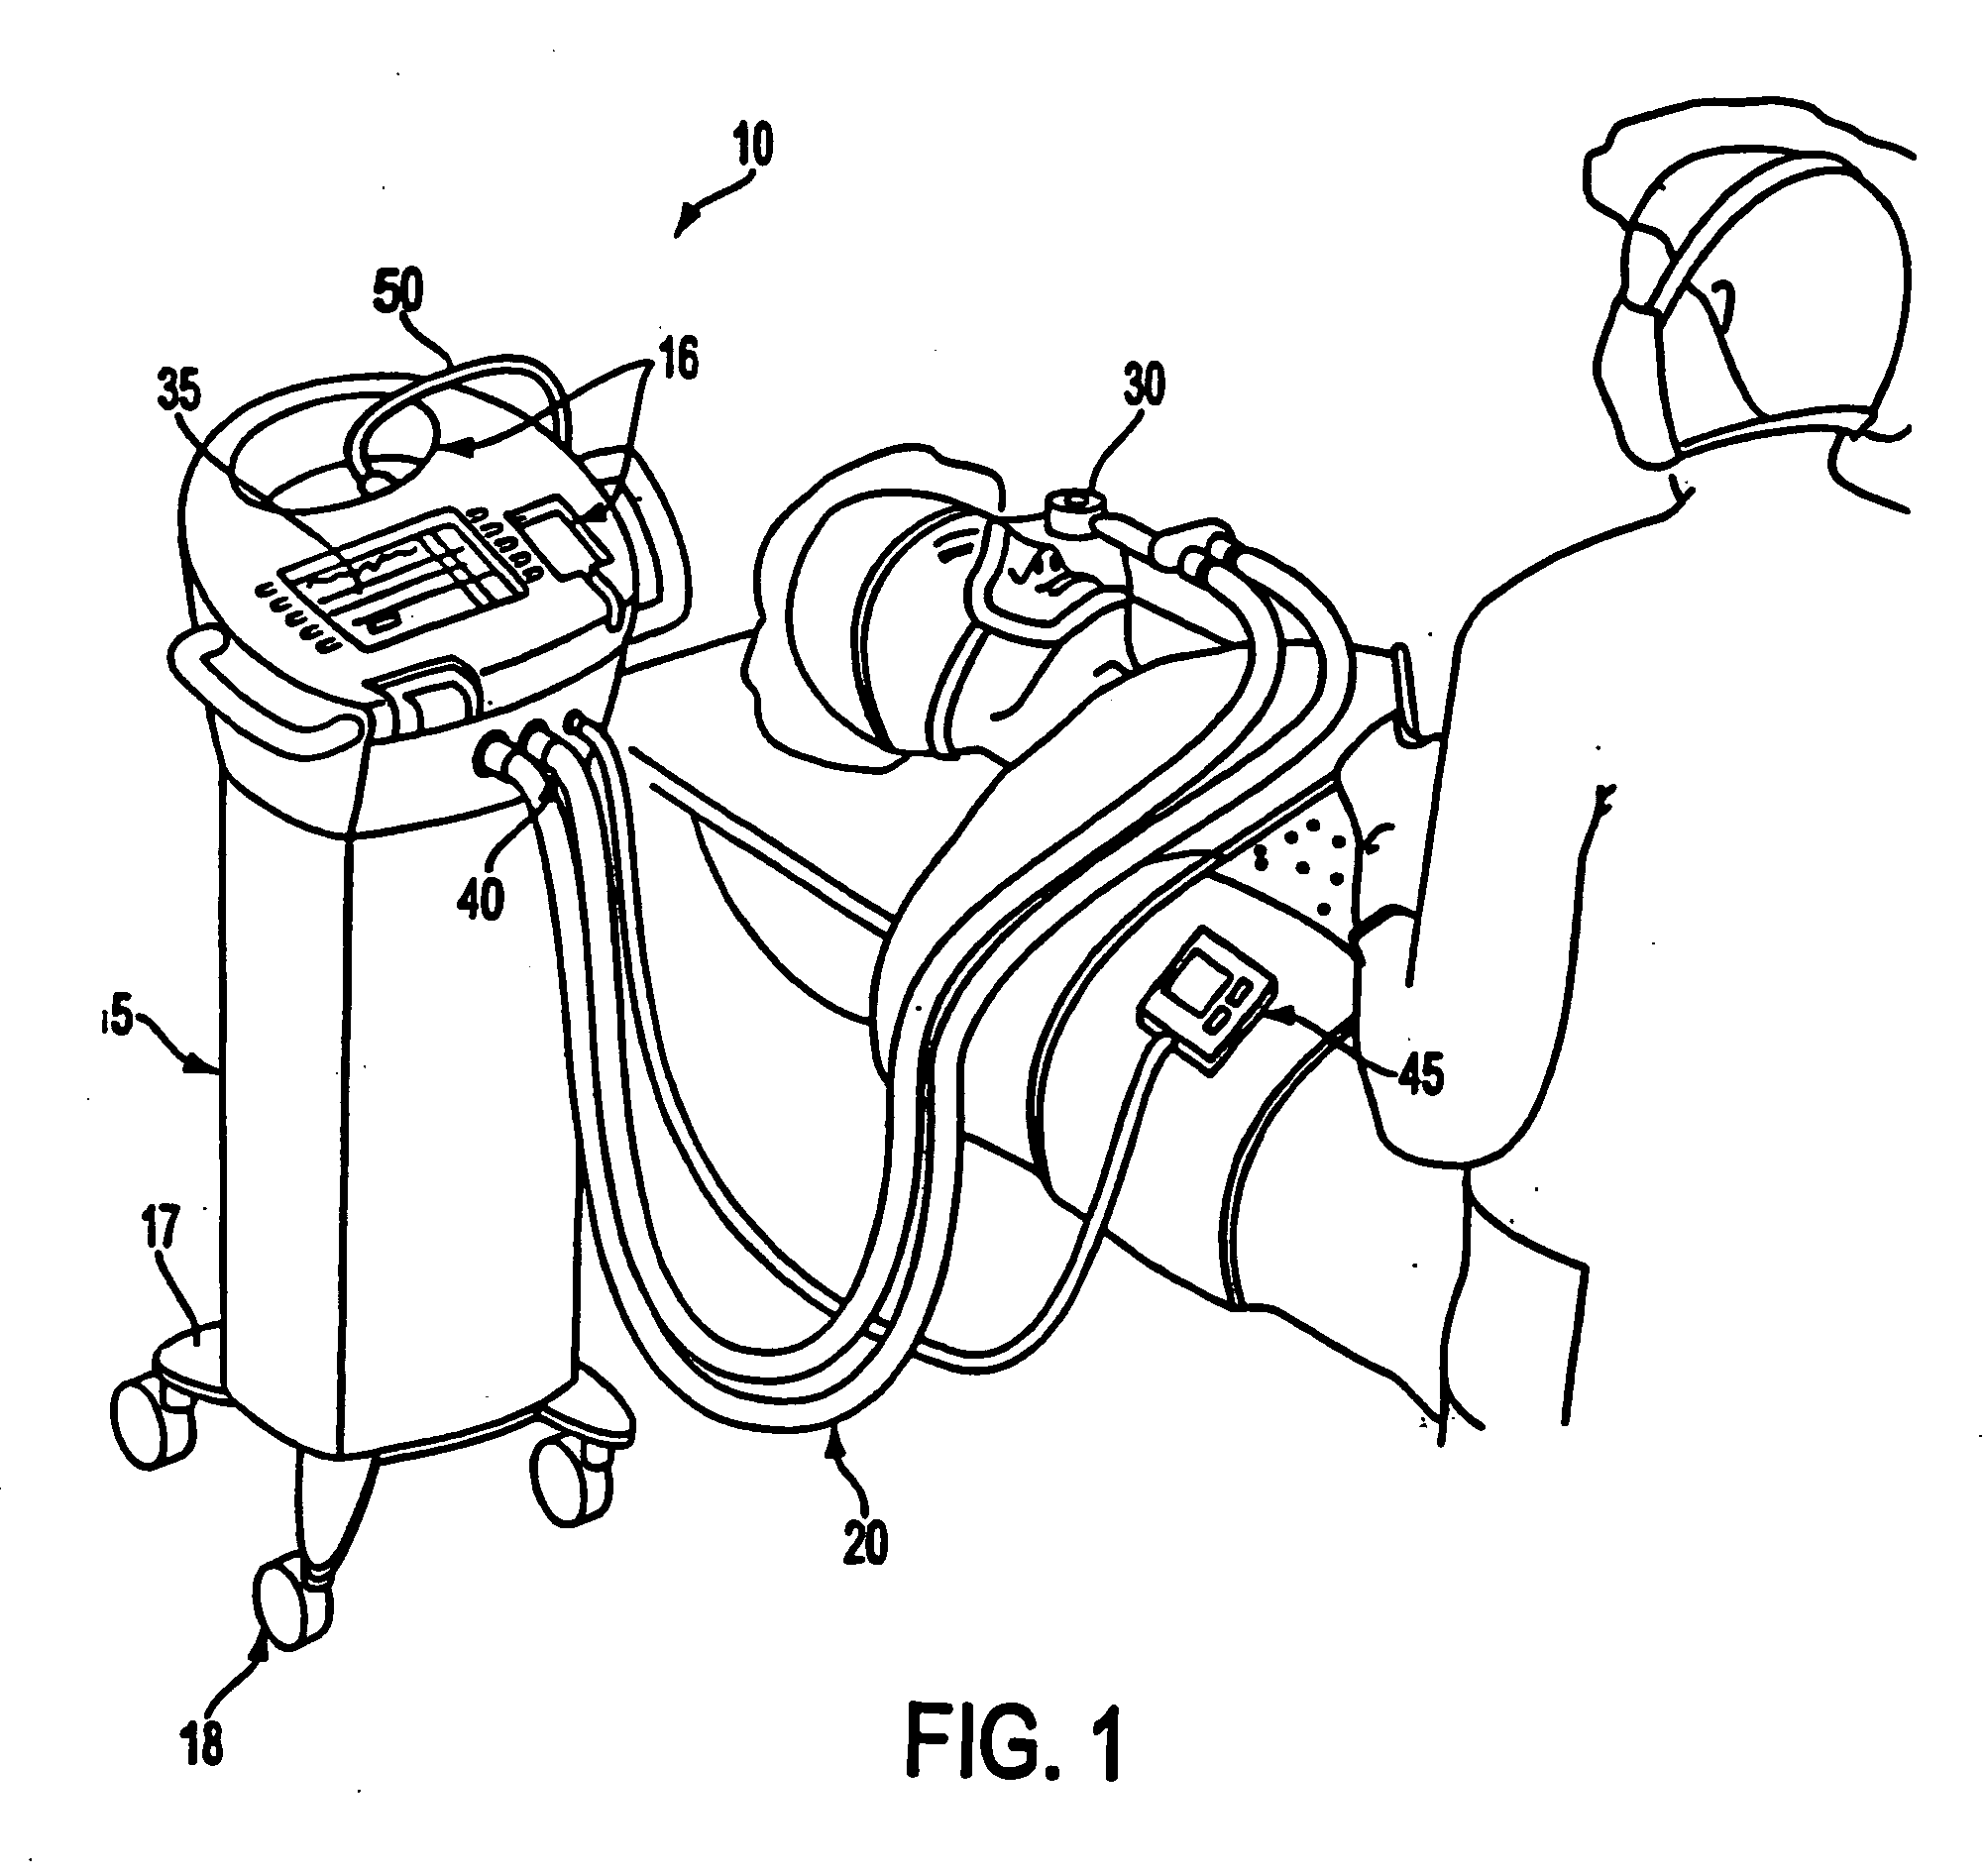 Apparatus, method and drug products for providing a conscious patient relief from pain and anxiety associated with medical or surgical procedures